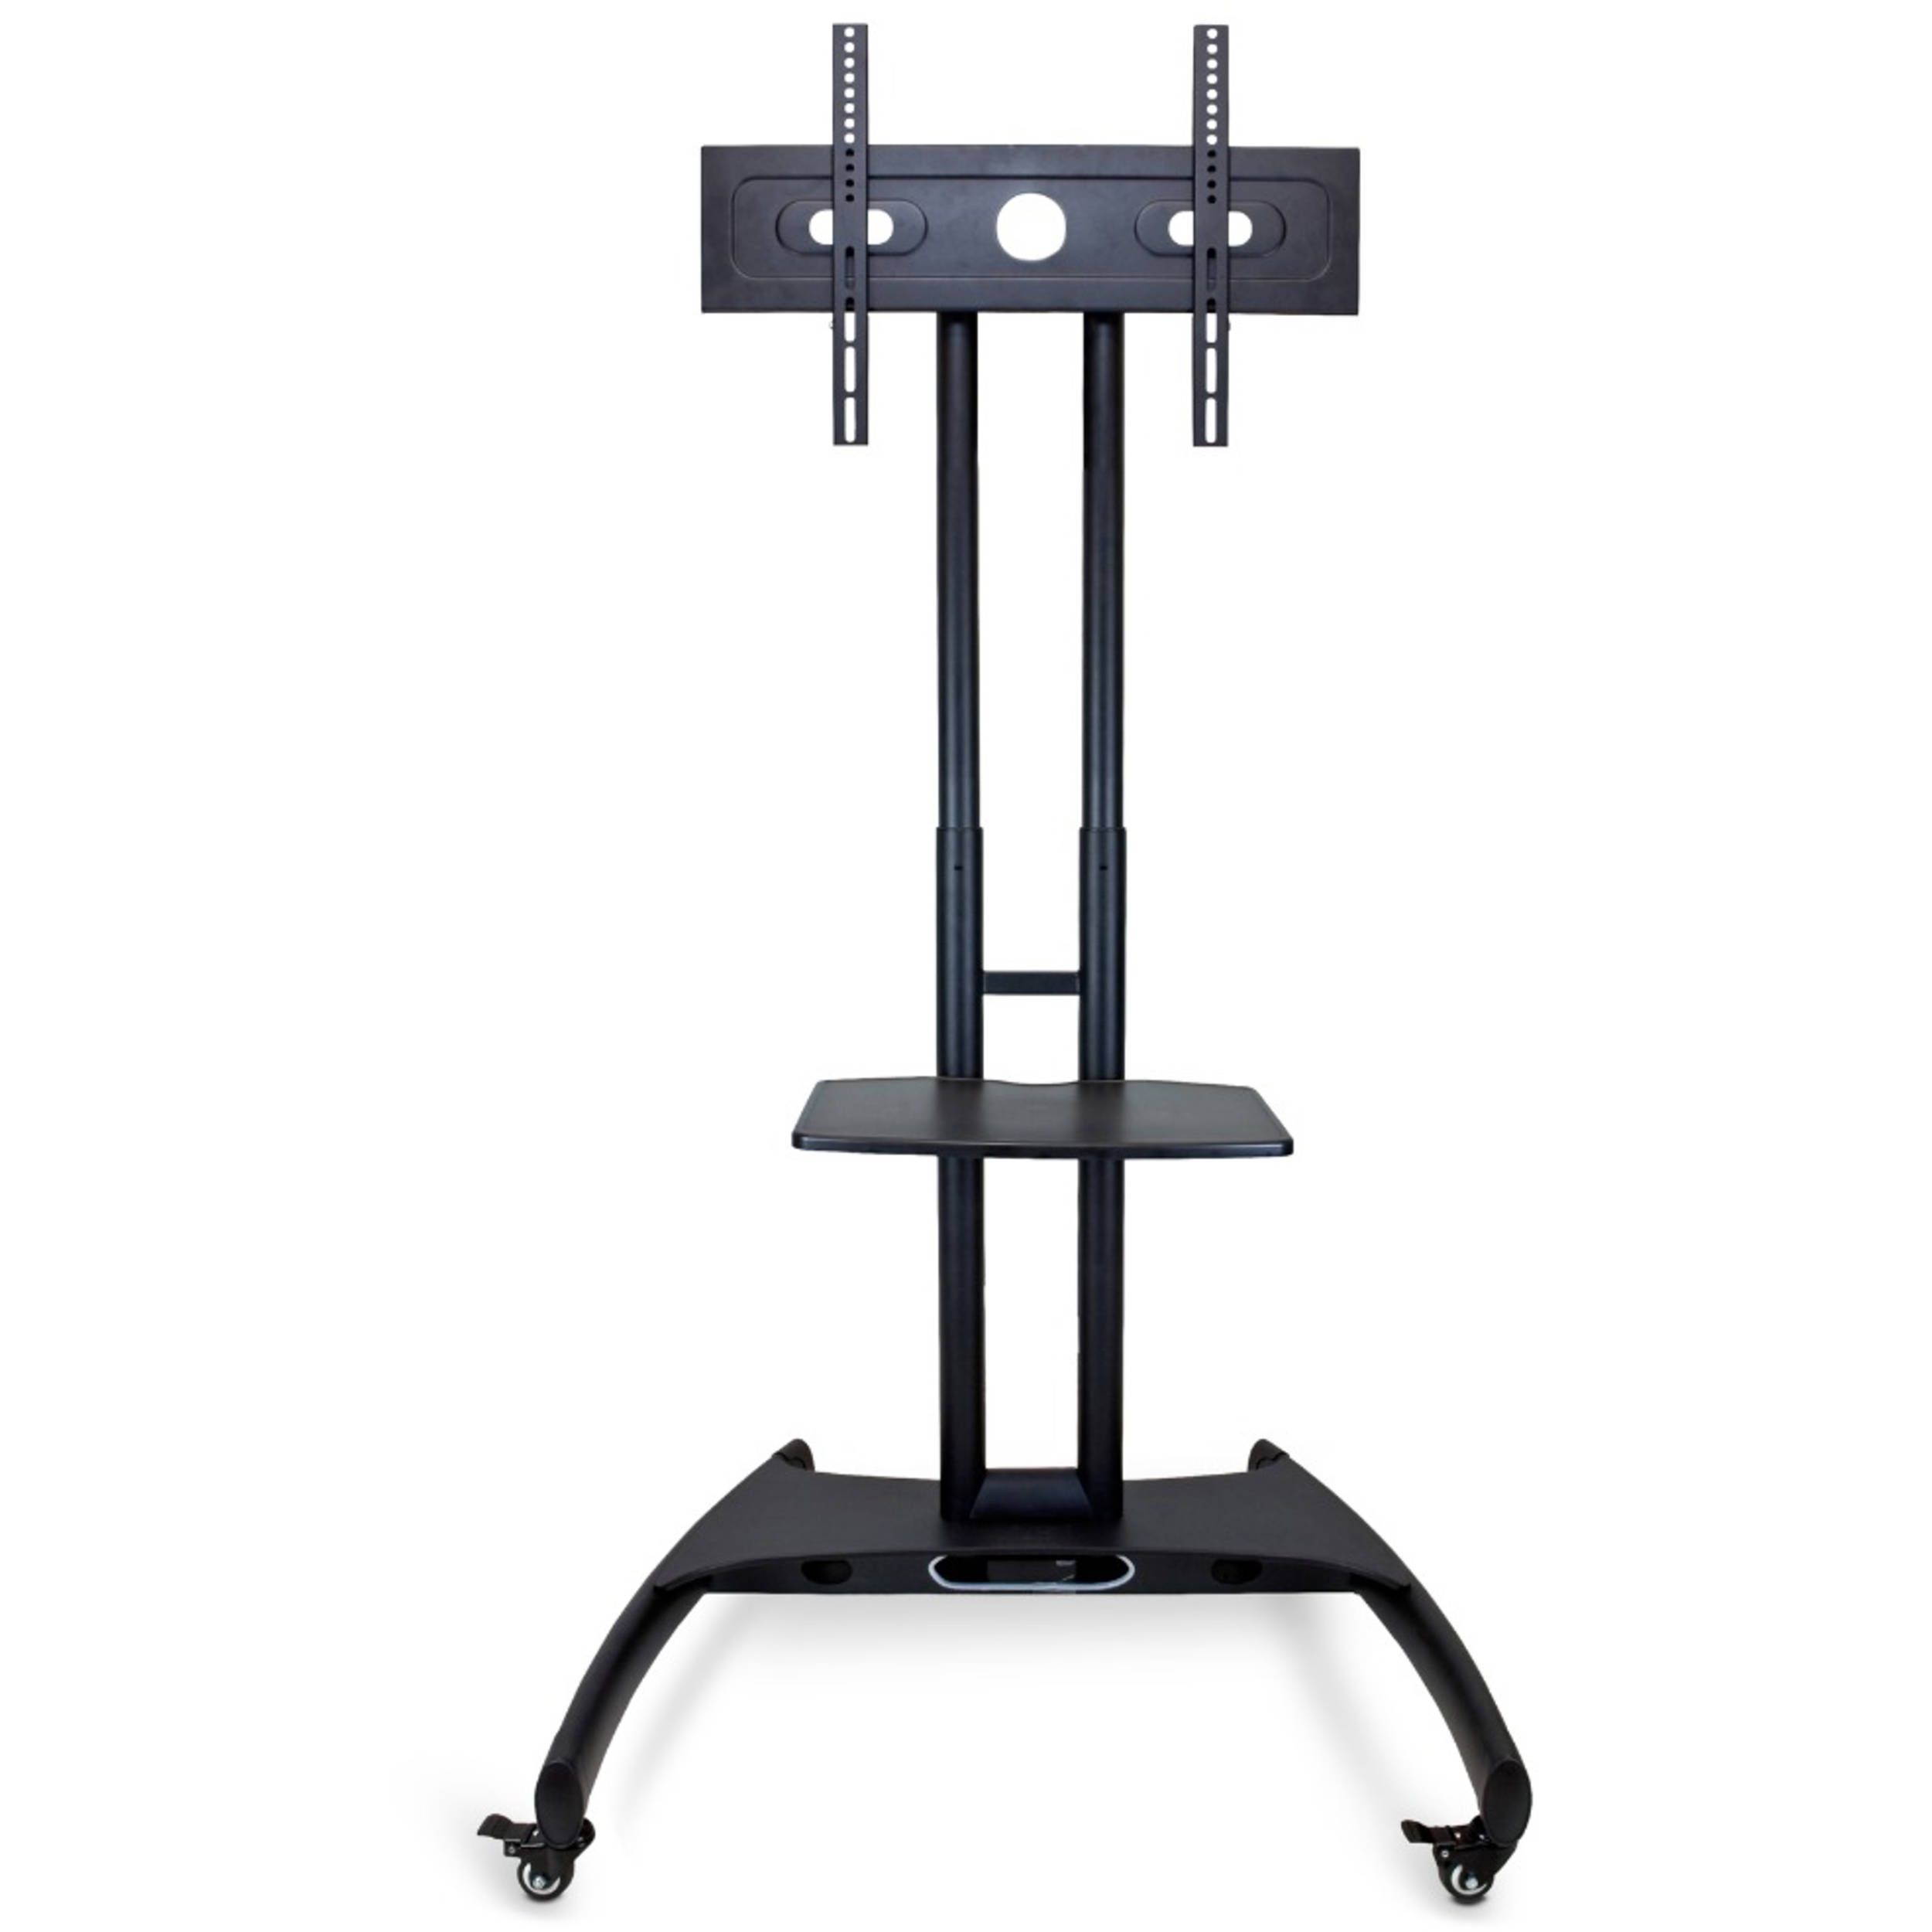 Luxor Fp2500 Adjustable Height Lcd Tv Stand Fp2500 B&h Photo Inside Swivel Floor Tv Stands Height Adjustable (View 8 of 15)